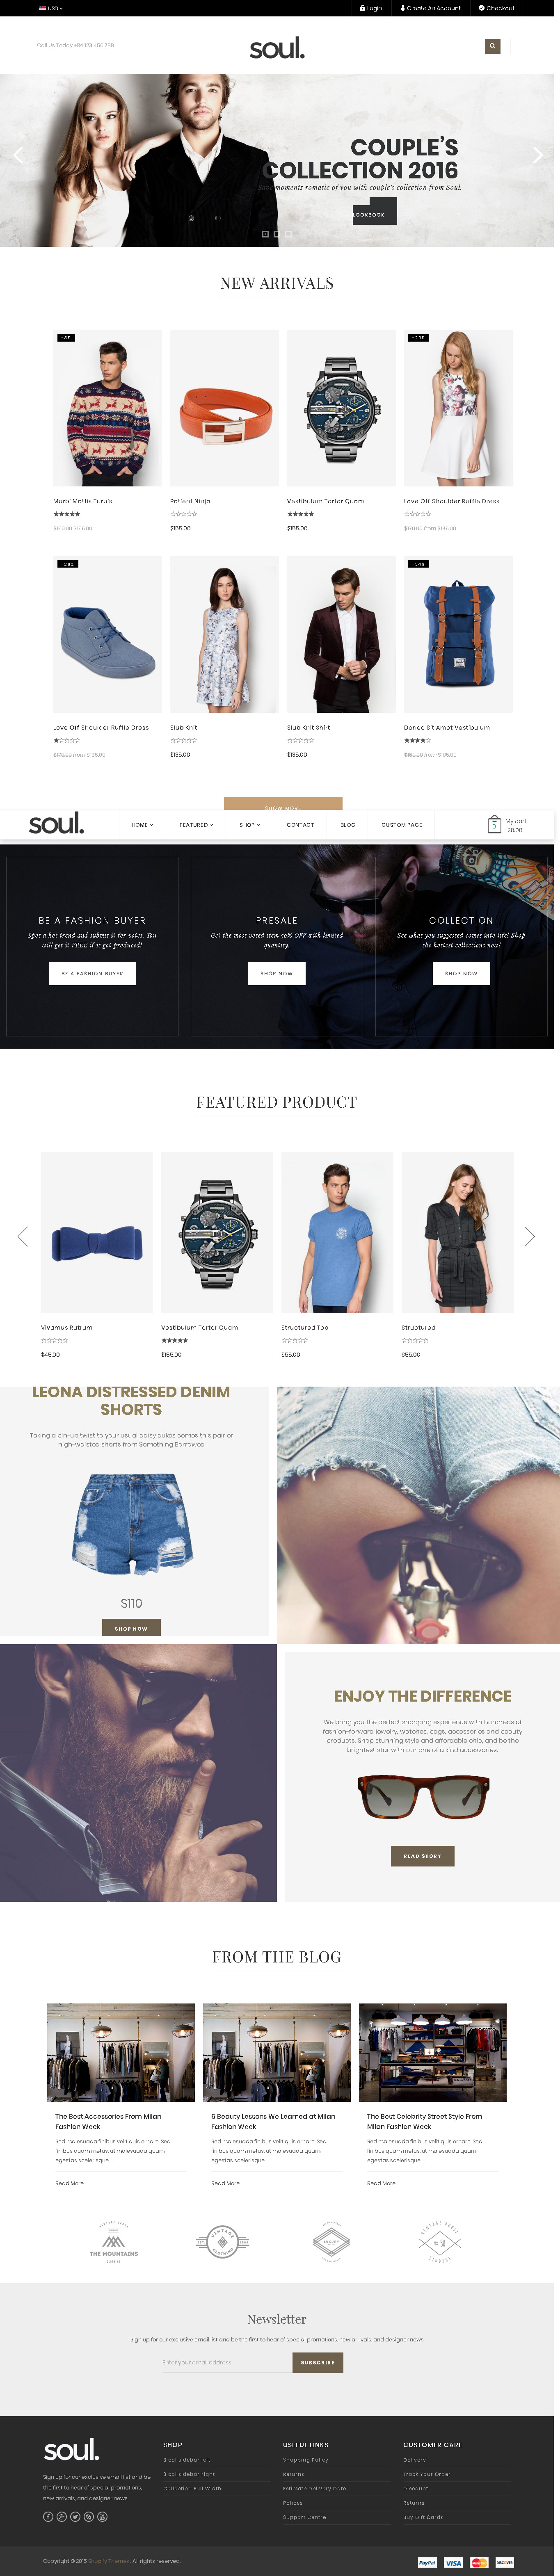 Best Shopify Themes for Accessories Store - Soul - Responsive Multi-purpose Shopify Theme